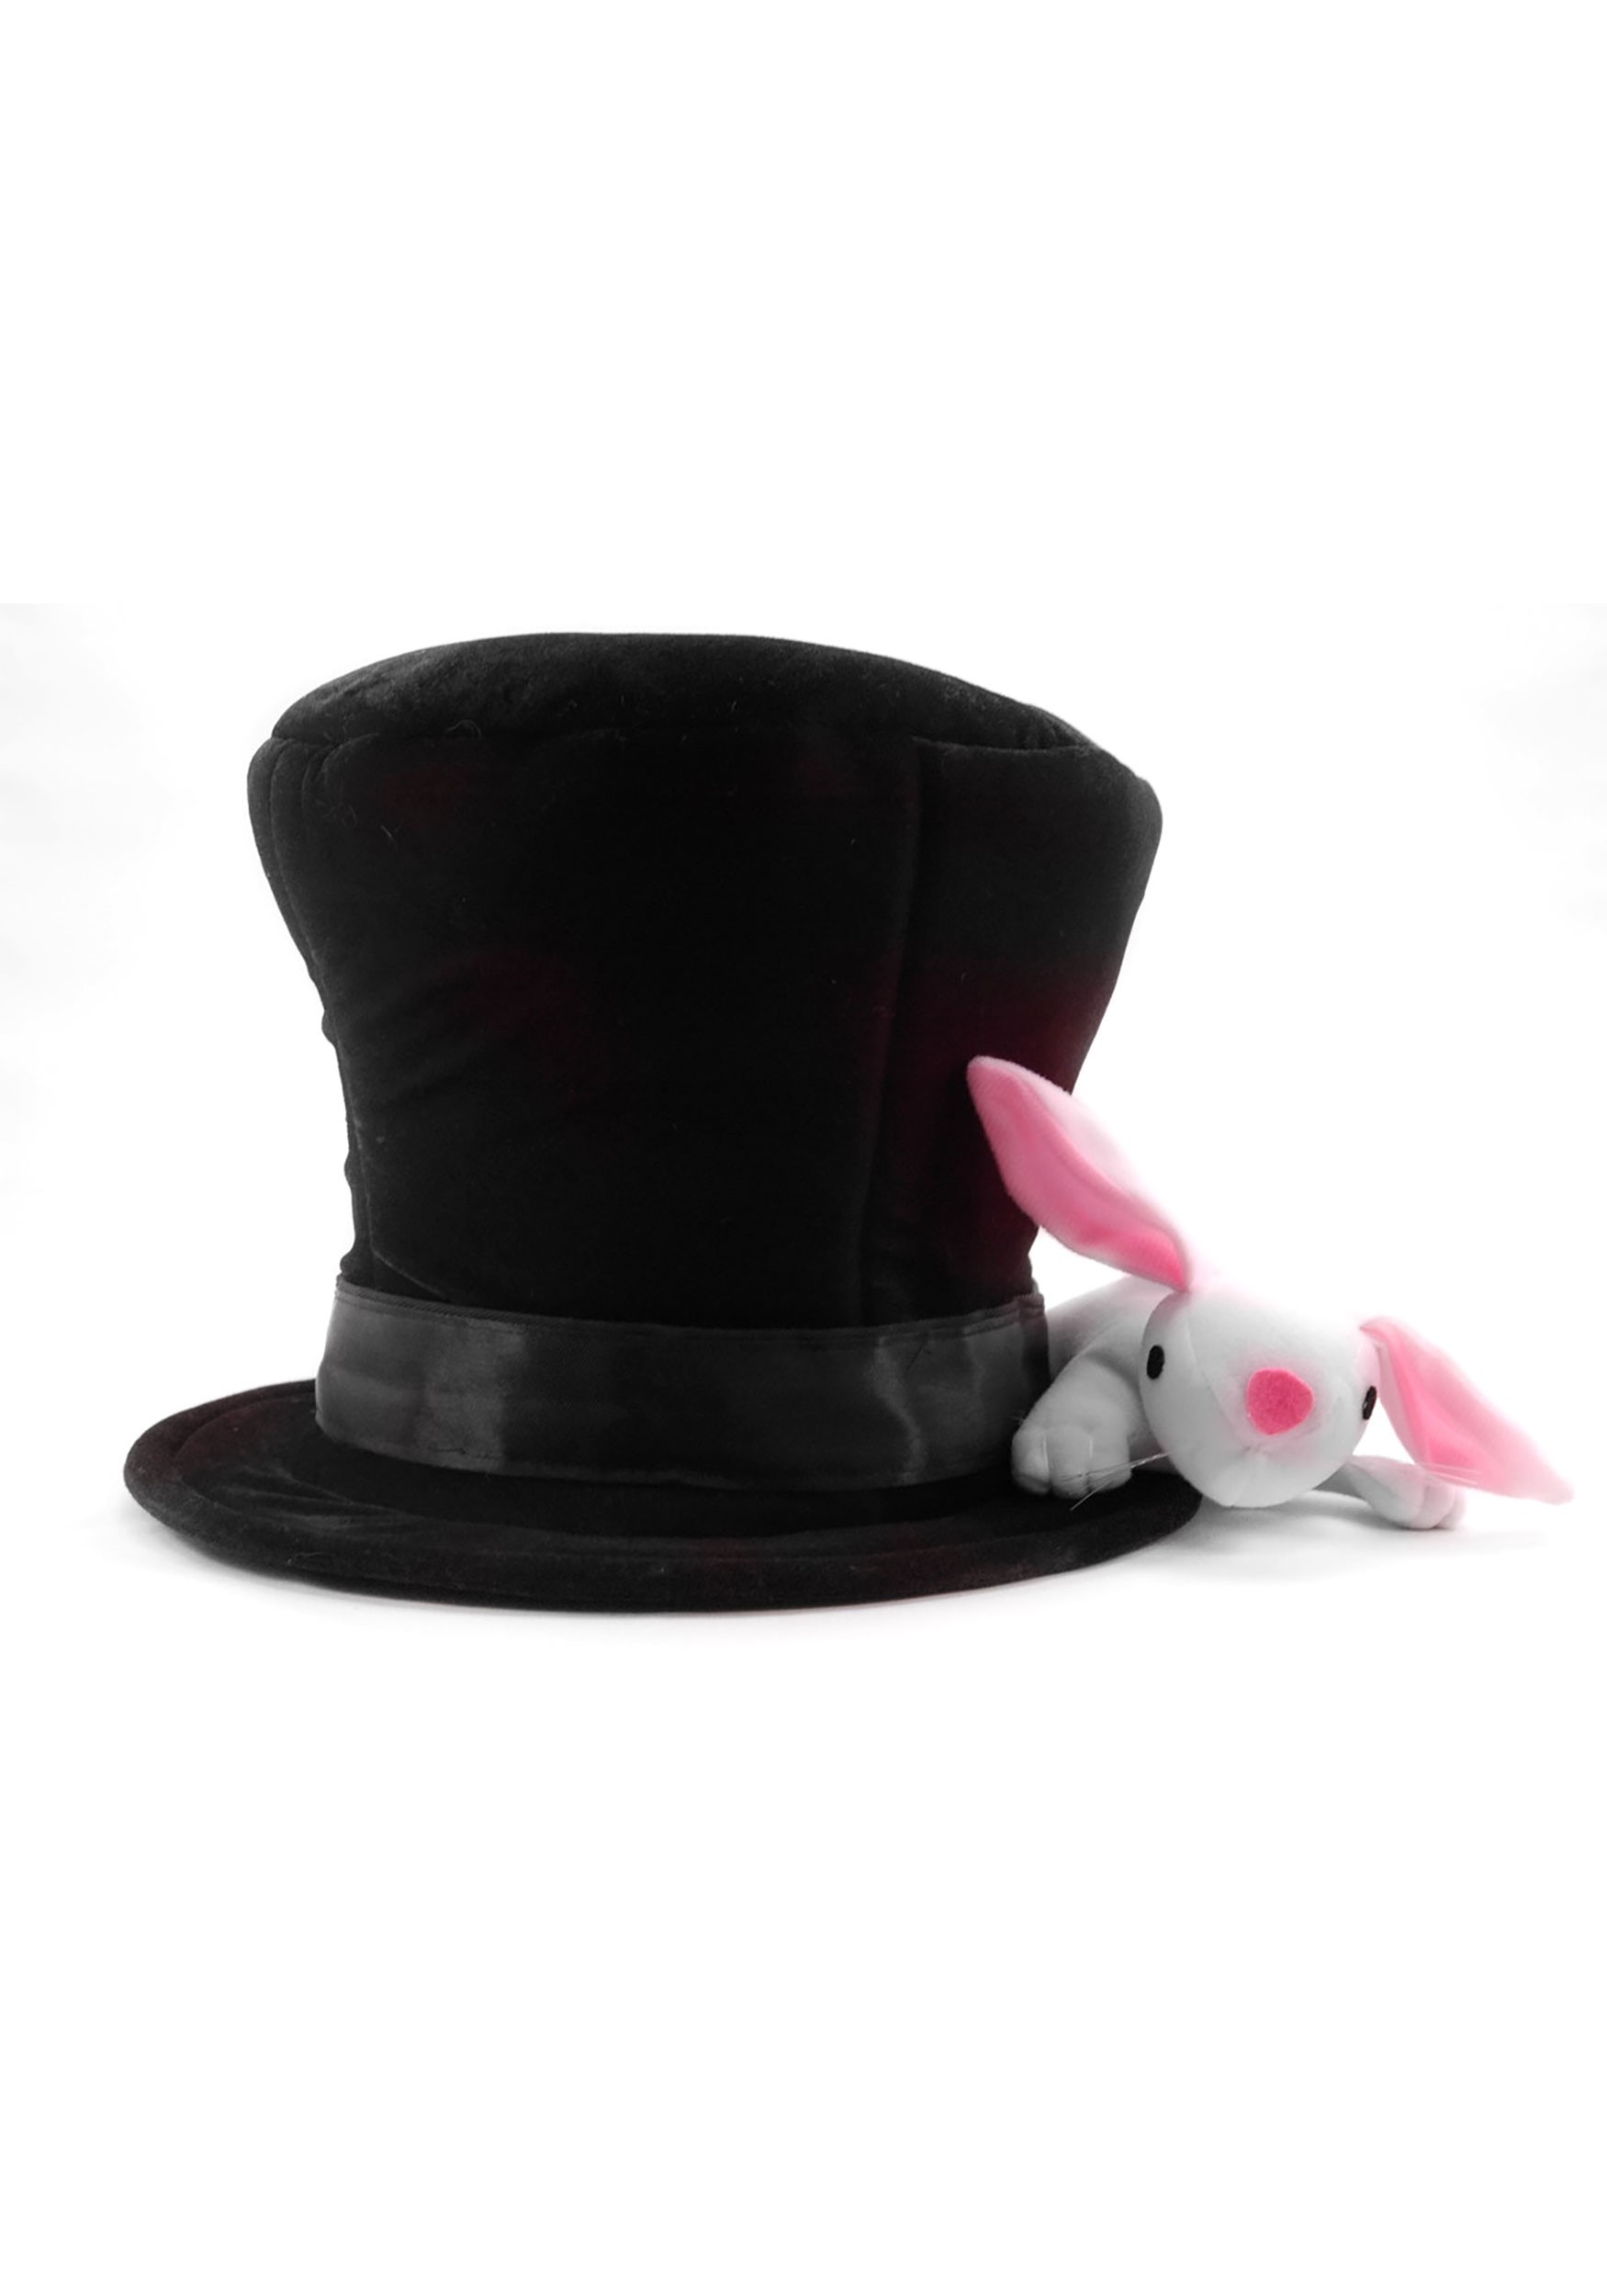 Magician Plush Costume Hat With Rabbit For Kids